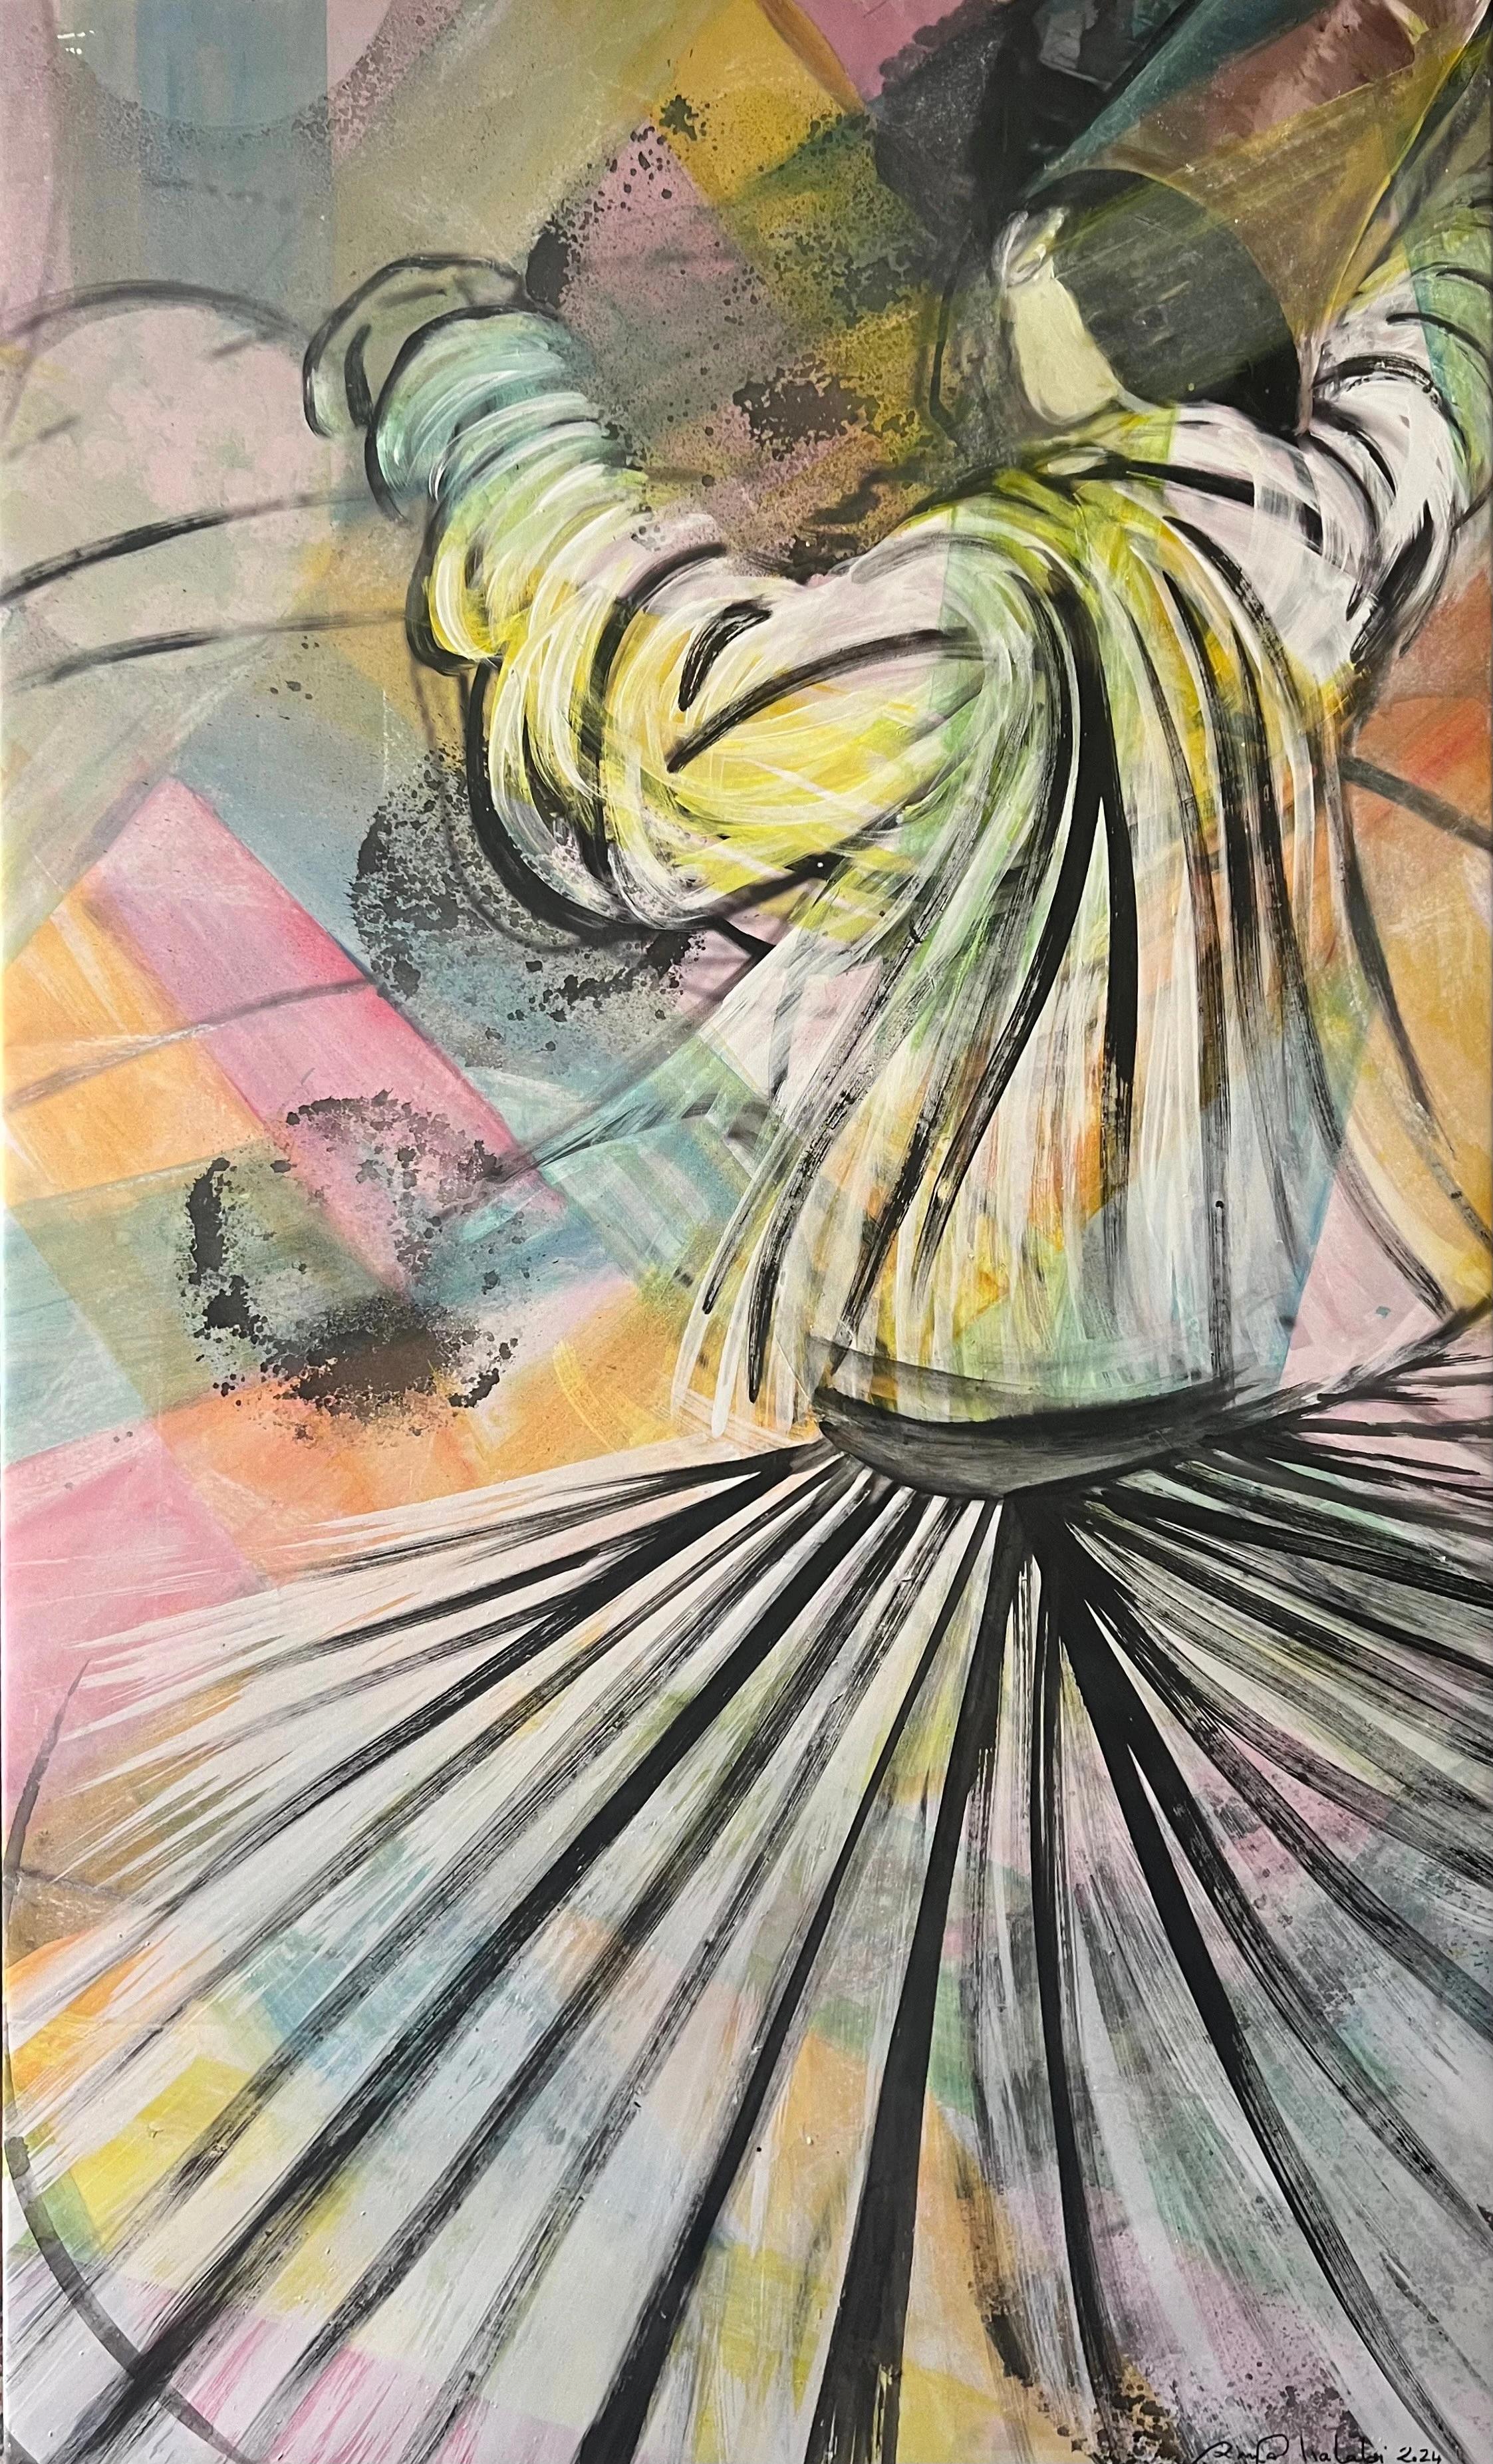 "Multicolor Dervish" Painting 55" x 34" inch by Rana Chalabi

Rana Chalabi is an established Syrian/Lebanese artist who lived in Cairo for over 35 years and now lives between Beirut, Cairo and Amsterdam.  

She is a visionary artist whose work spans